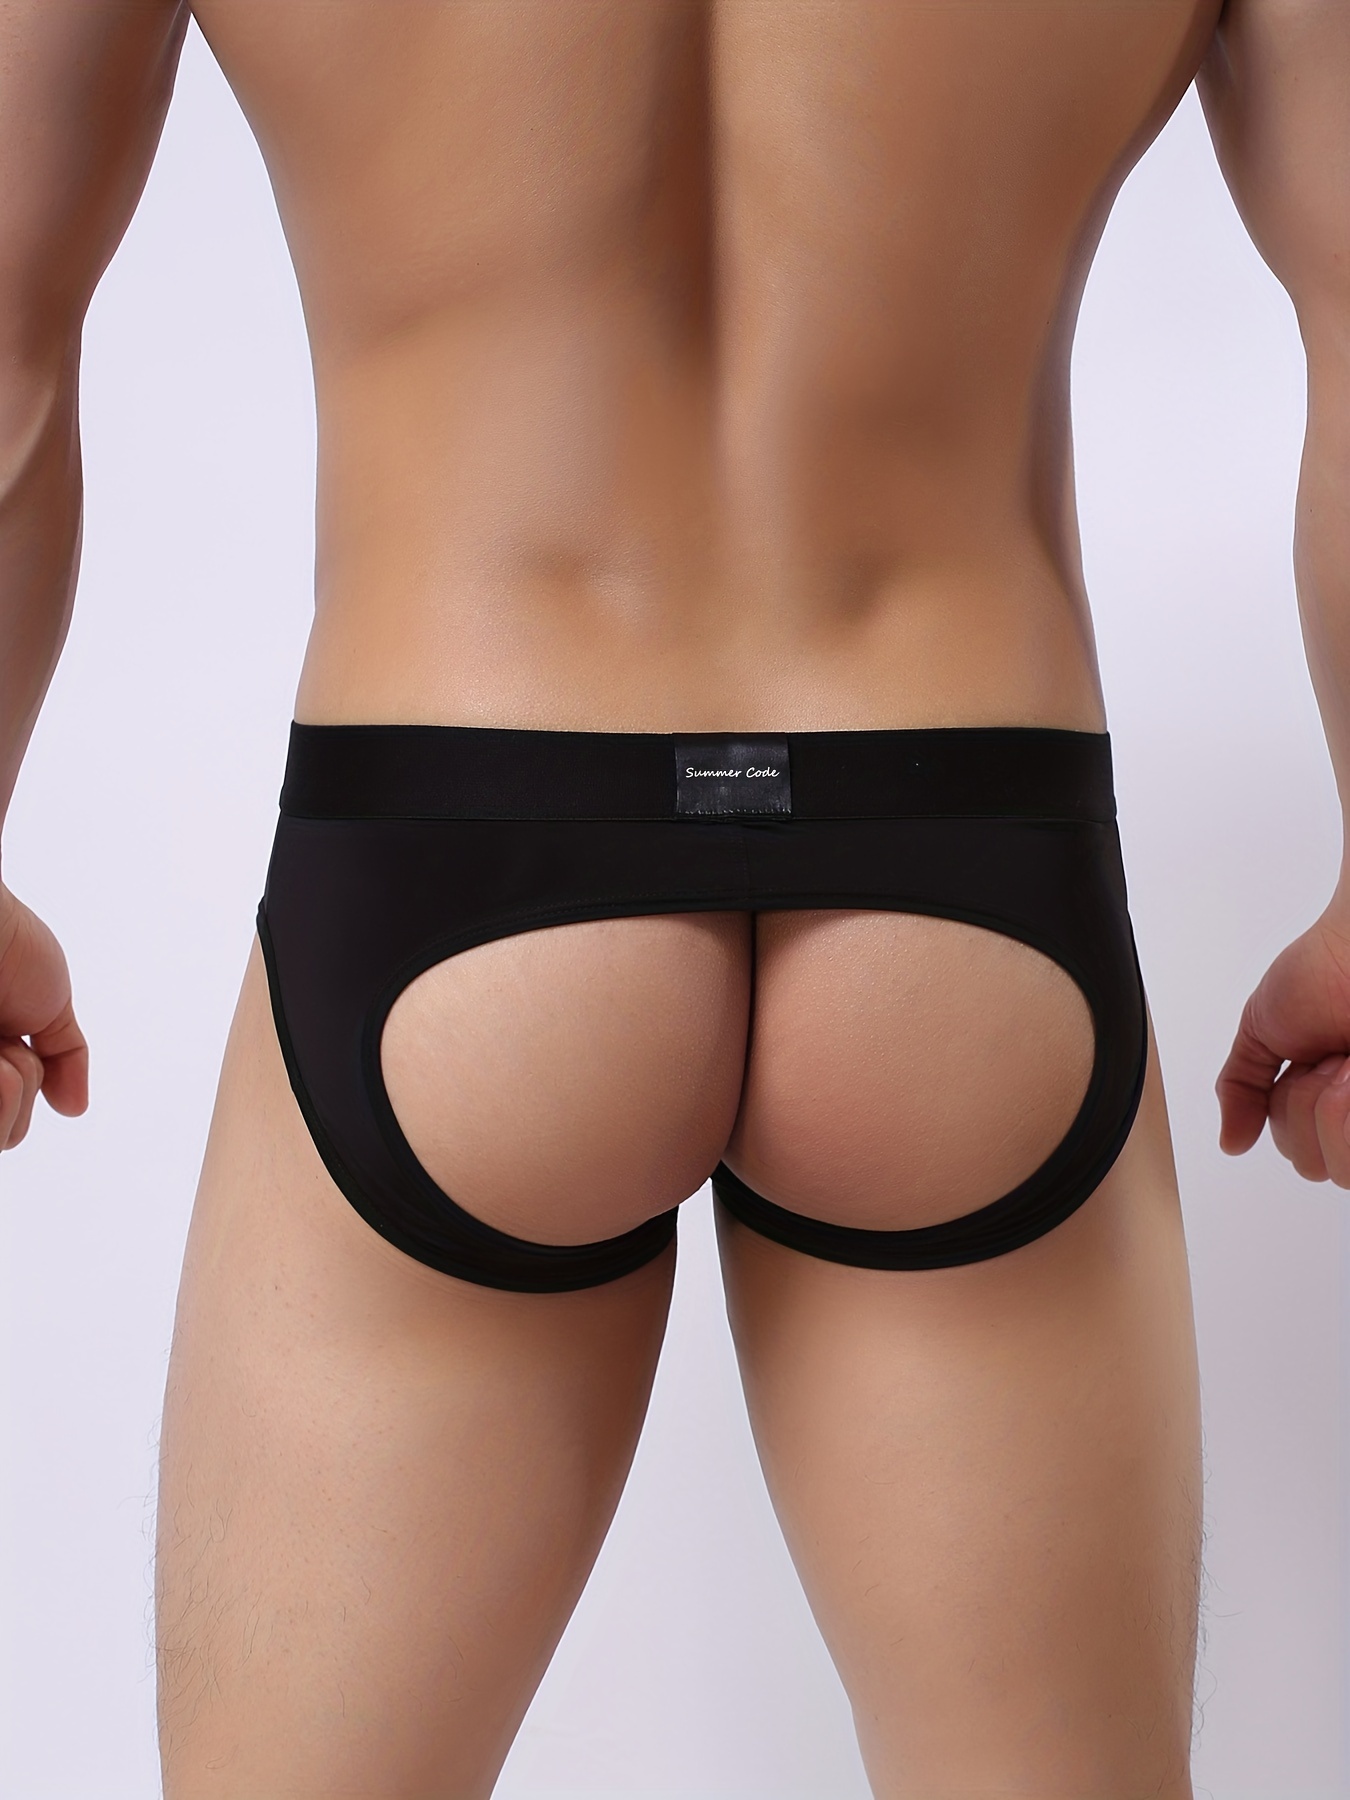 Sexy Mens Lingerie G-string Male T-back Thongs 3D Elephant